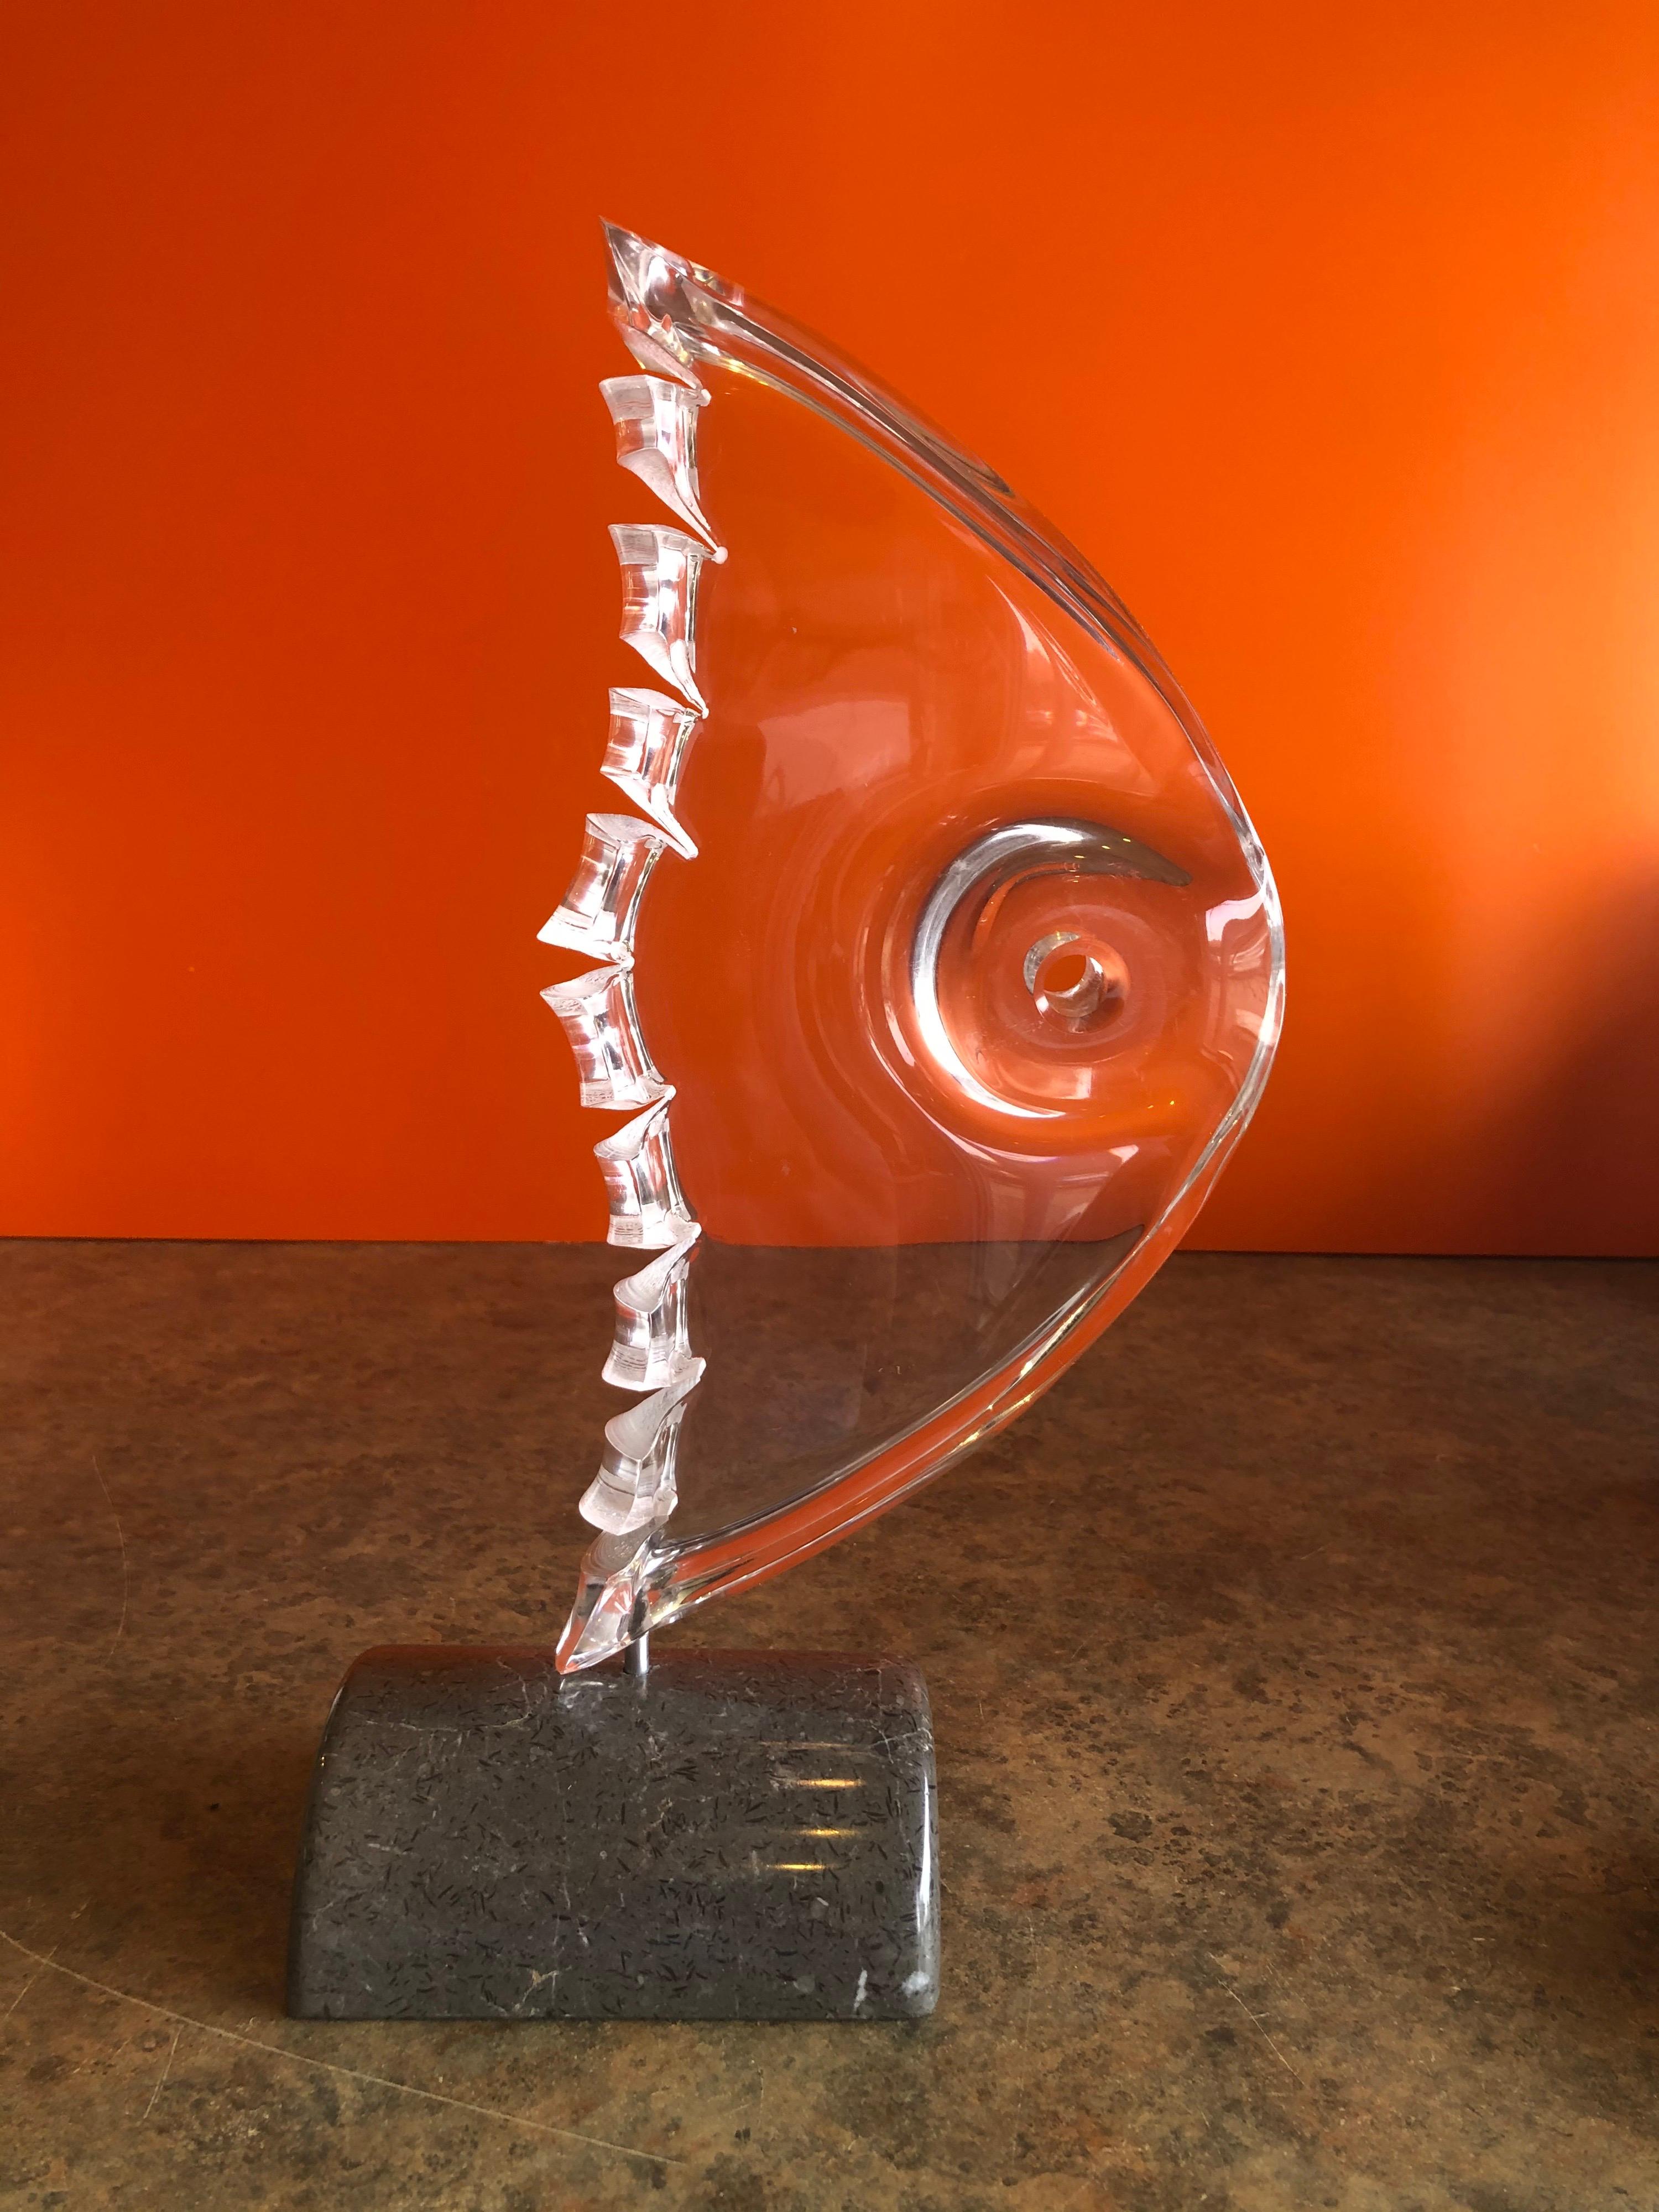 A very nice MCM acrylic fish sculpture on brown marble base from the Astrolite products line by the Ritts Co. of Los Angeles, circa 1970s. The sculpture is removable from the base and can be attached by a steel pole in the base of the piece. It